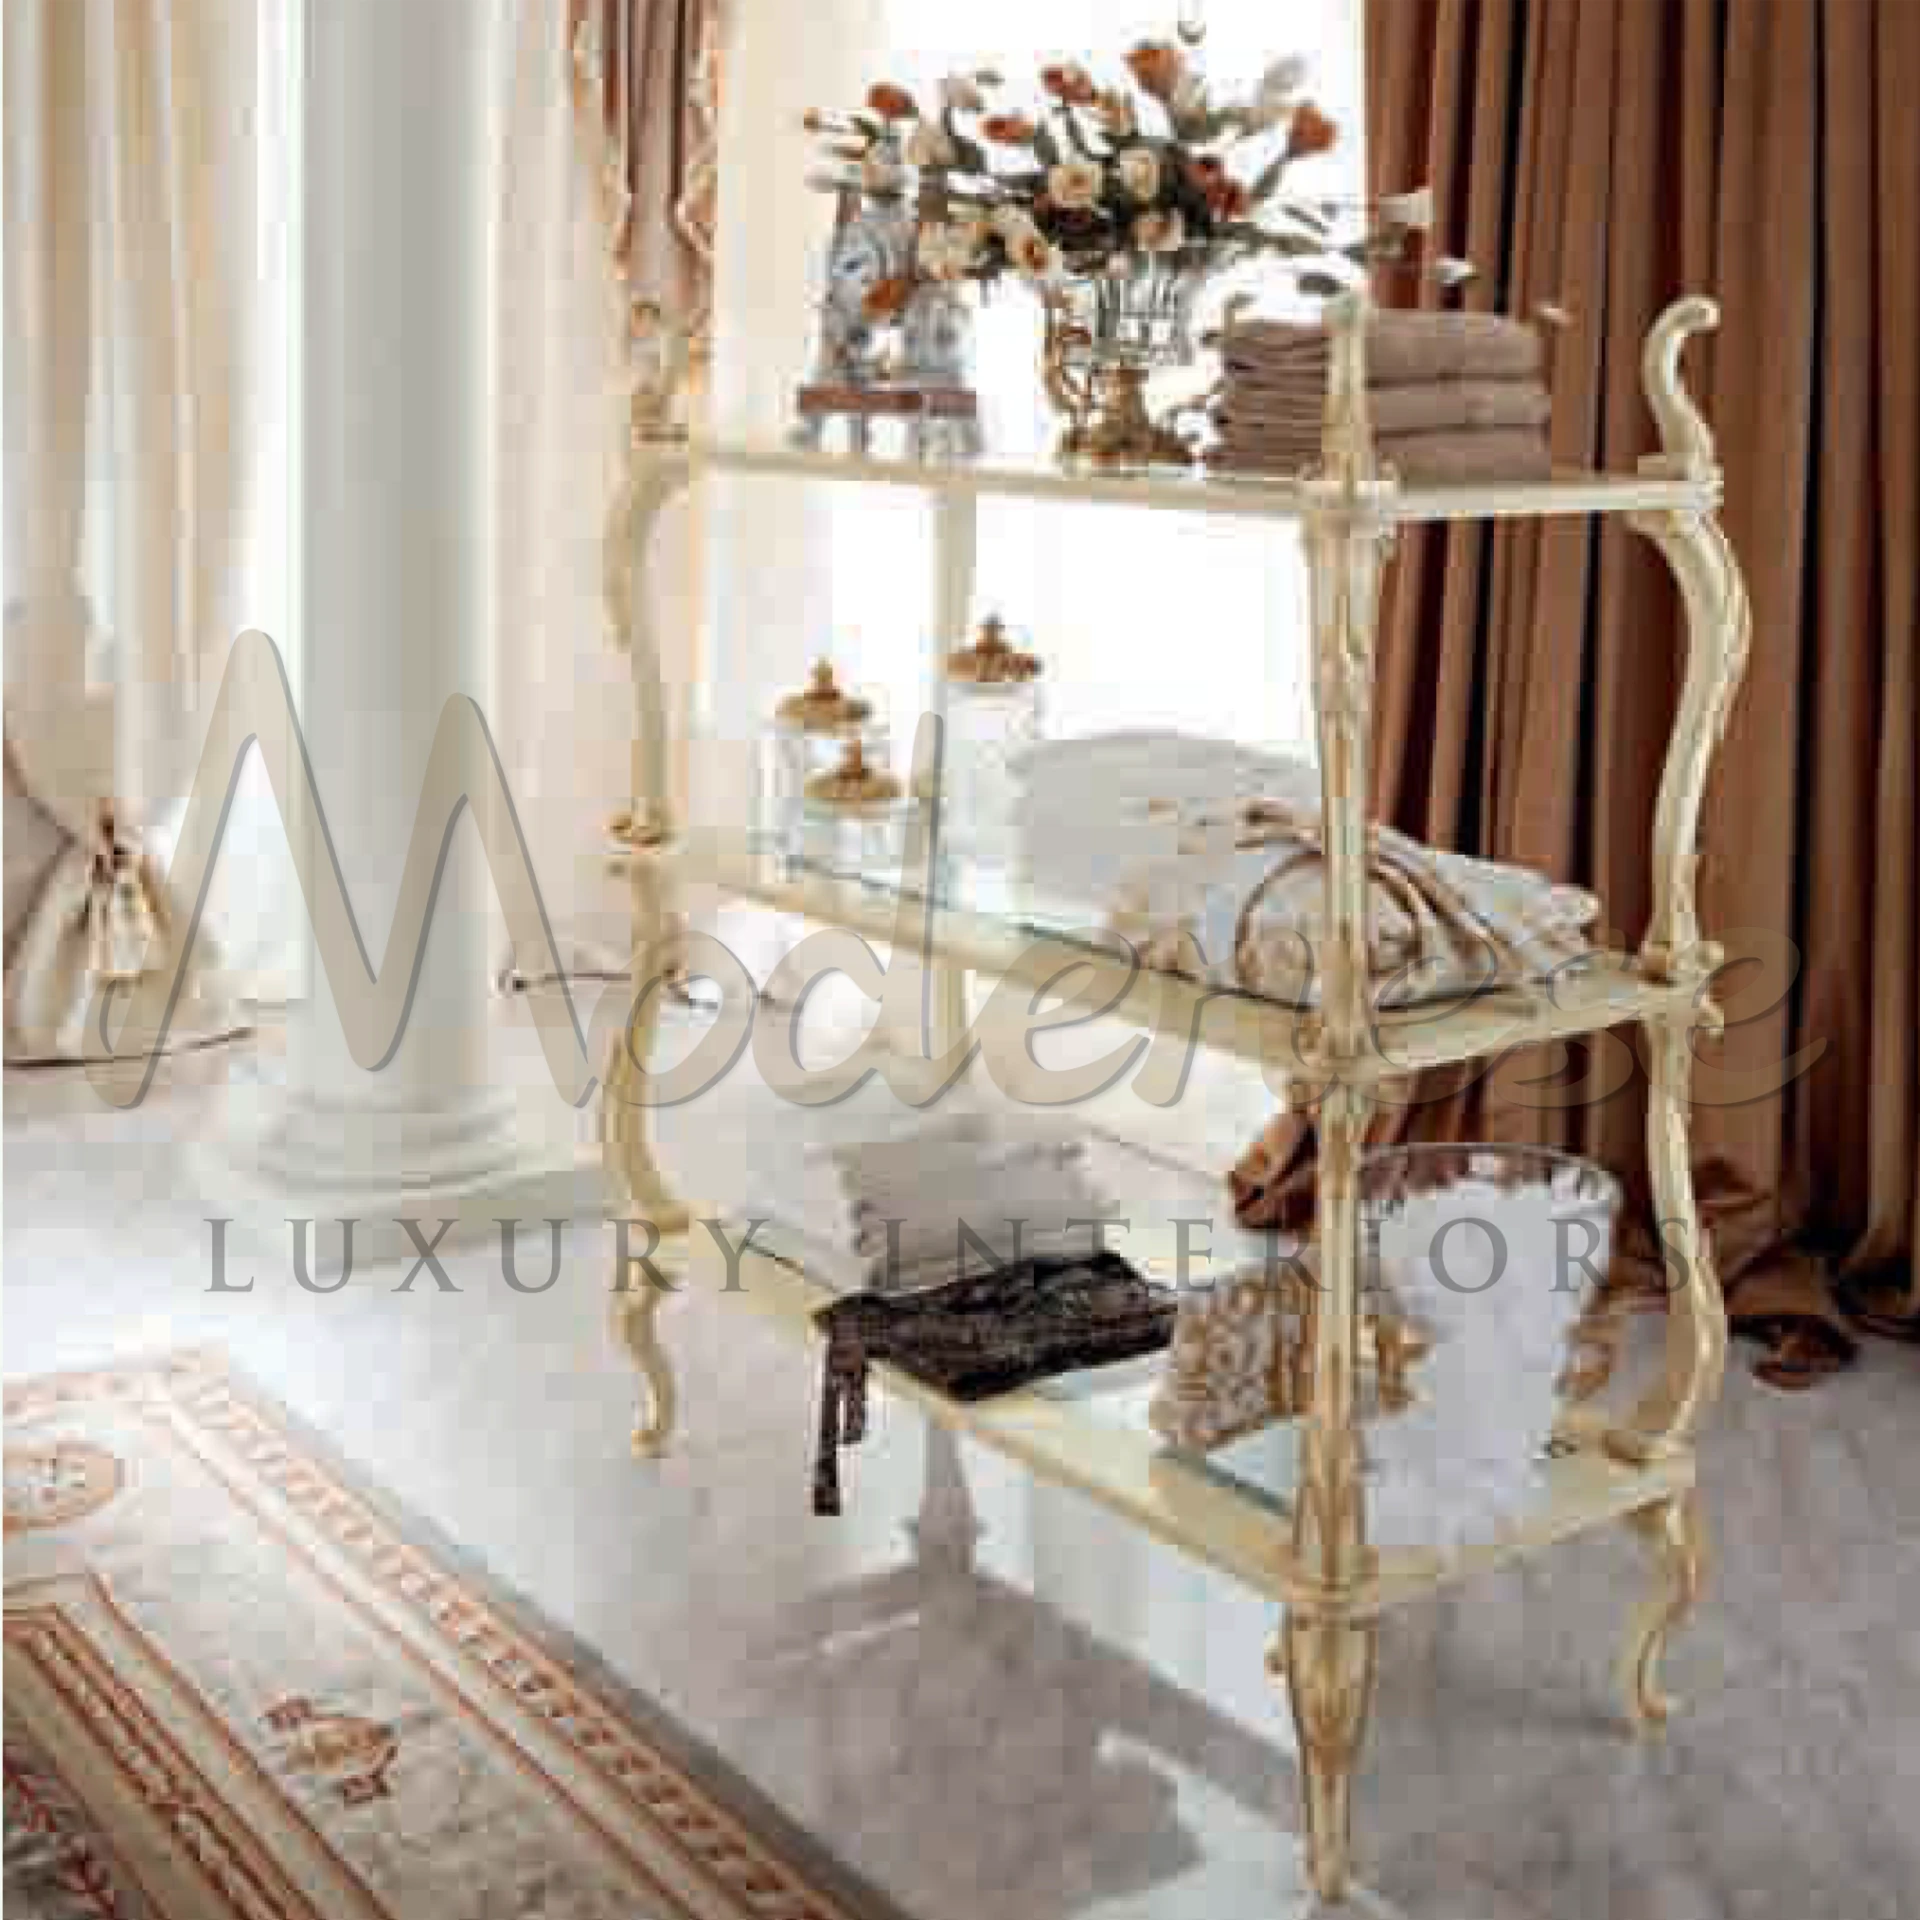 Made in Italy furniture etagere accessories for luxury bathroom